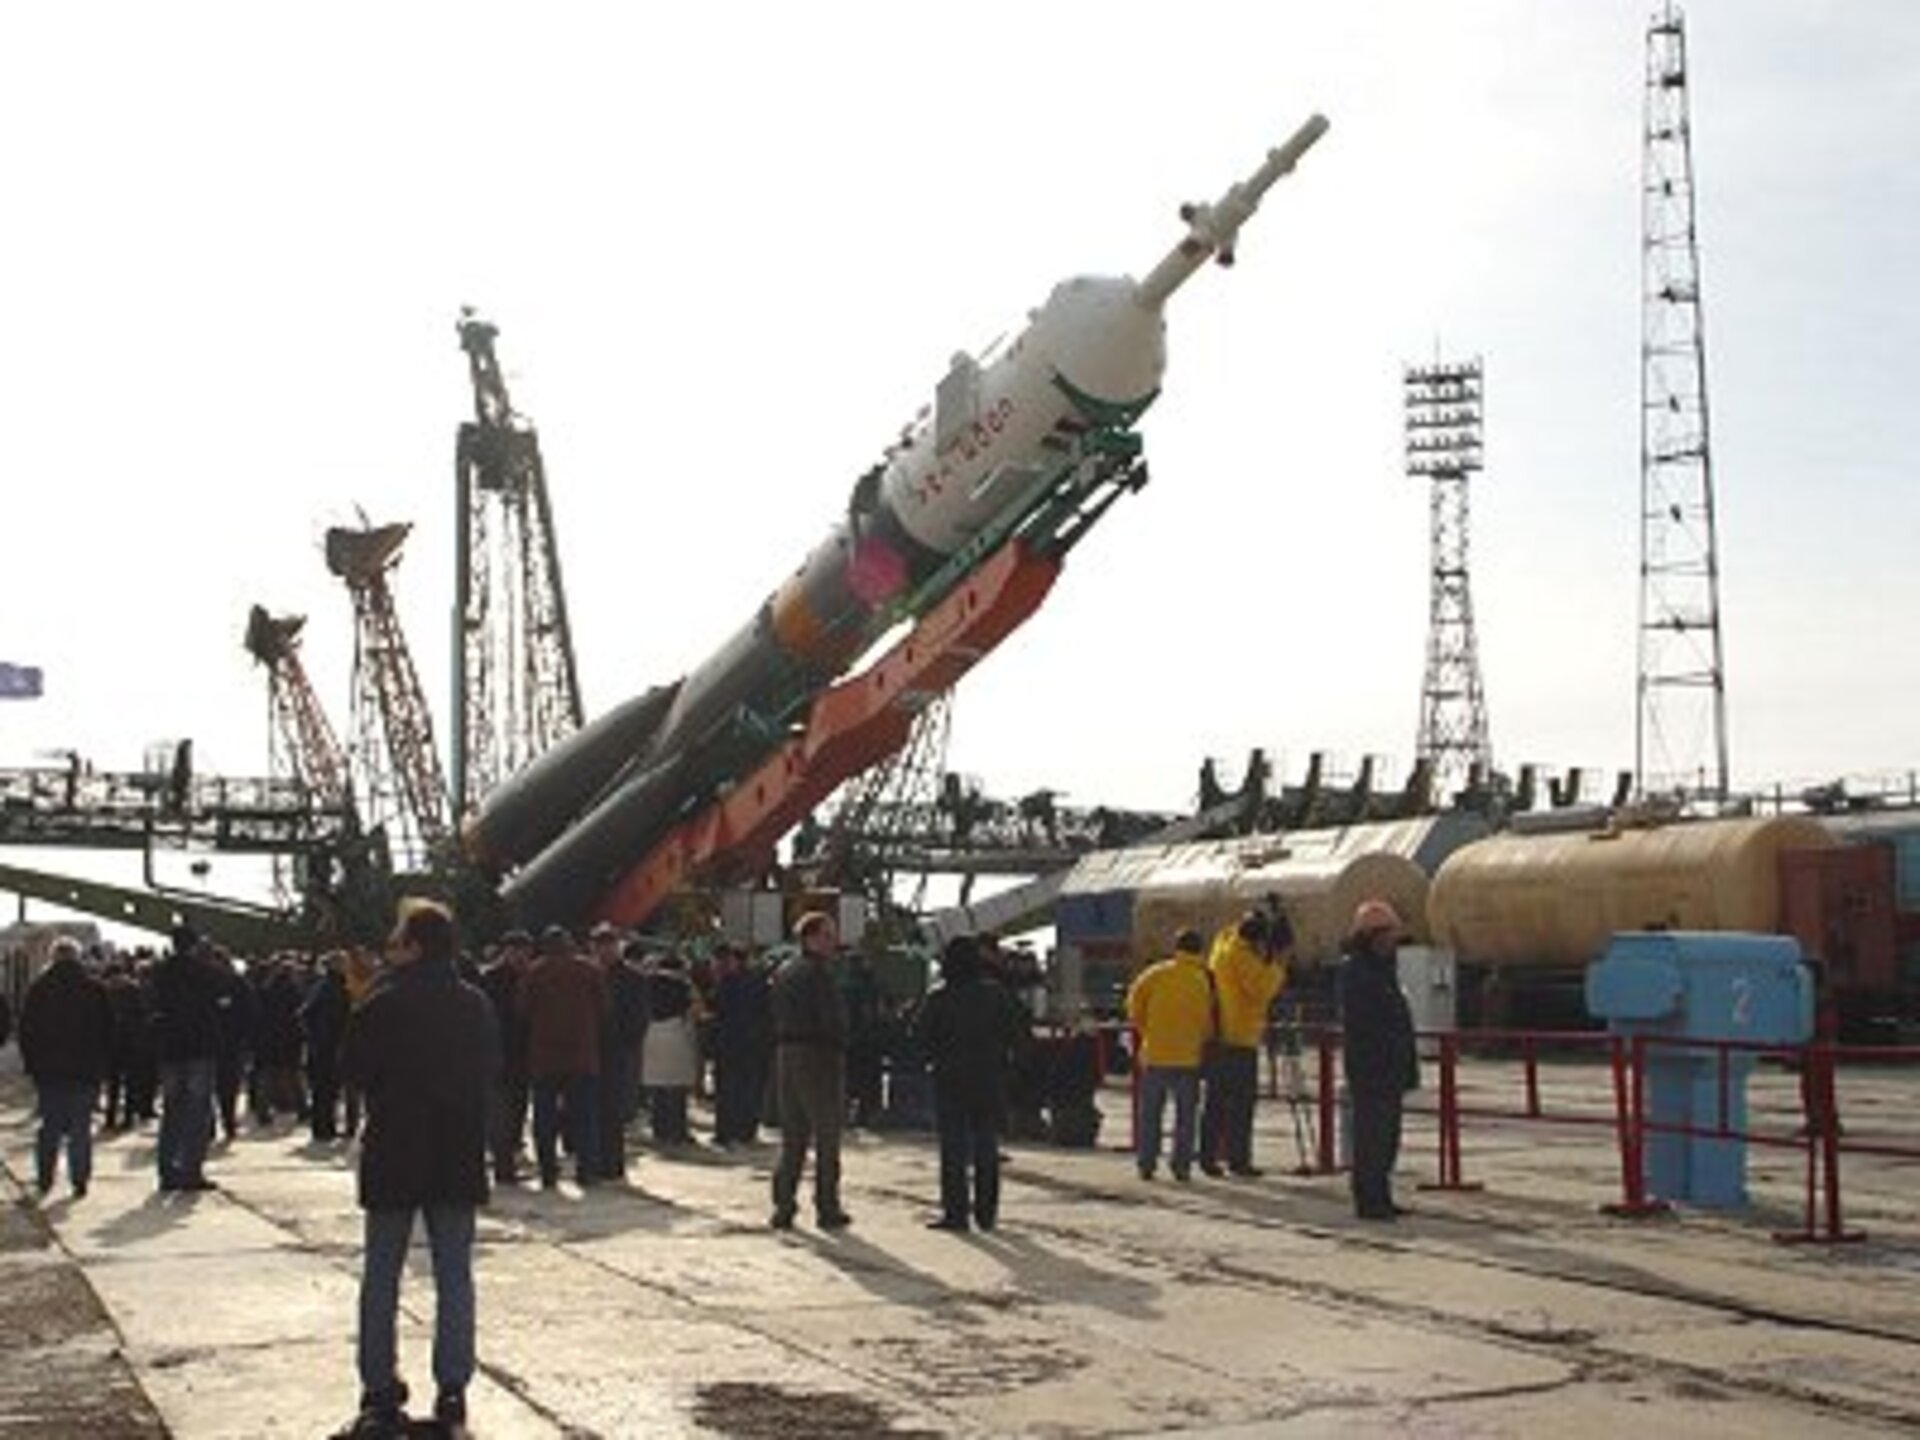 Soyuz launcher is moved into the upright position on the launch pad